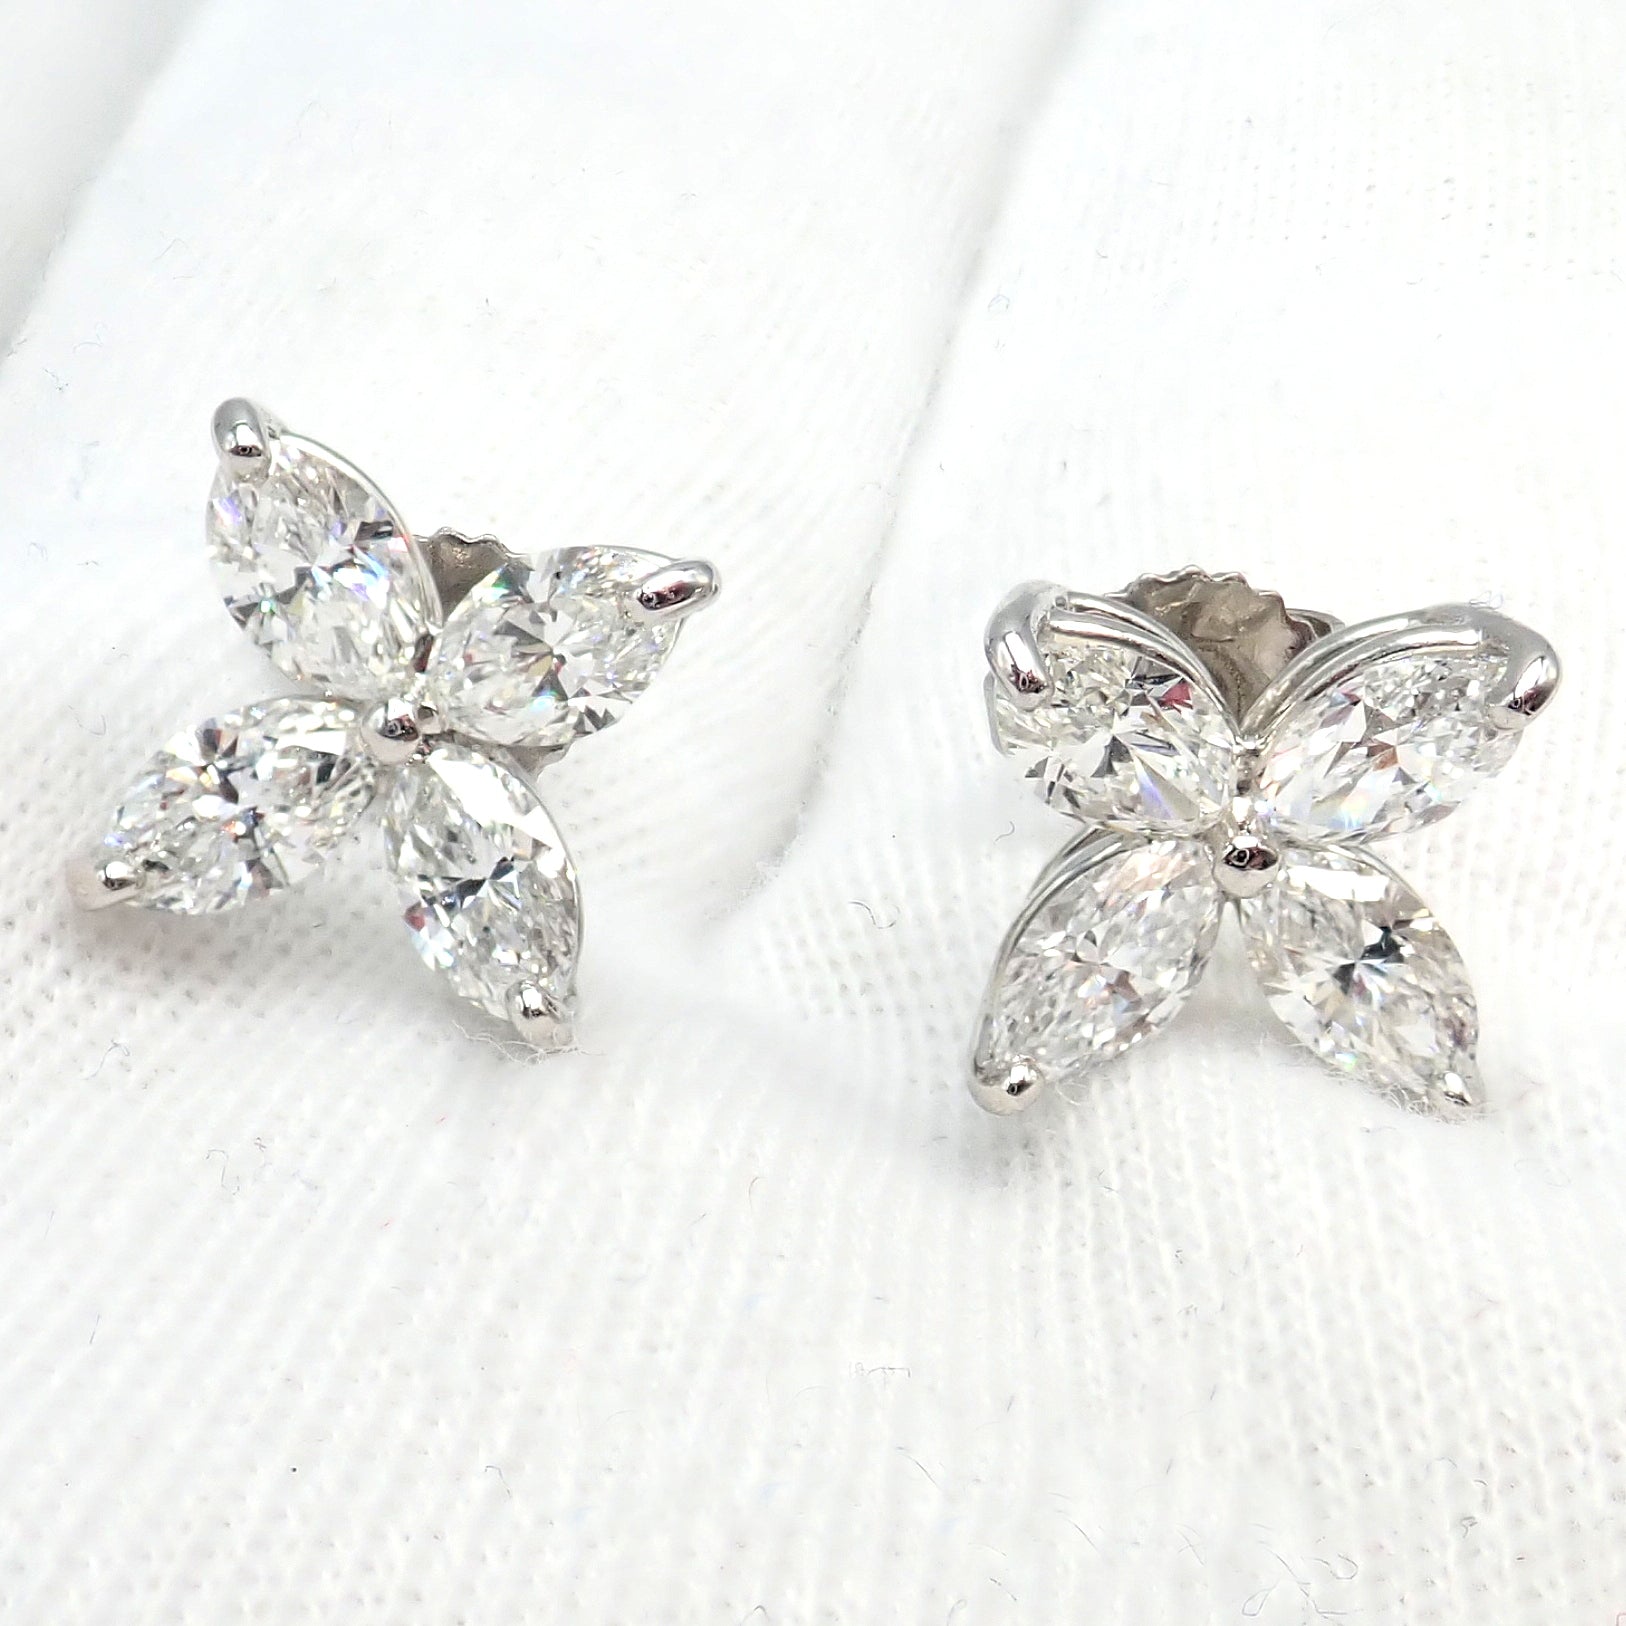 Tiffany & Co. Jewelry & Watches:Fine Jewelry:Earrings Authentic! Tiffany & Co Platinum Victoria 1.62ct Diamond Large Stud Earrings